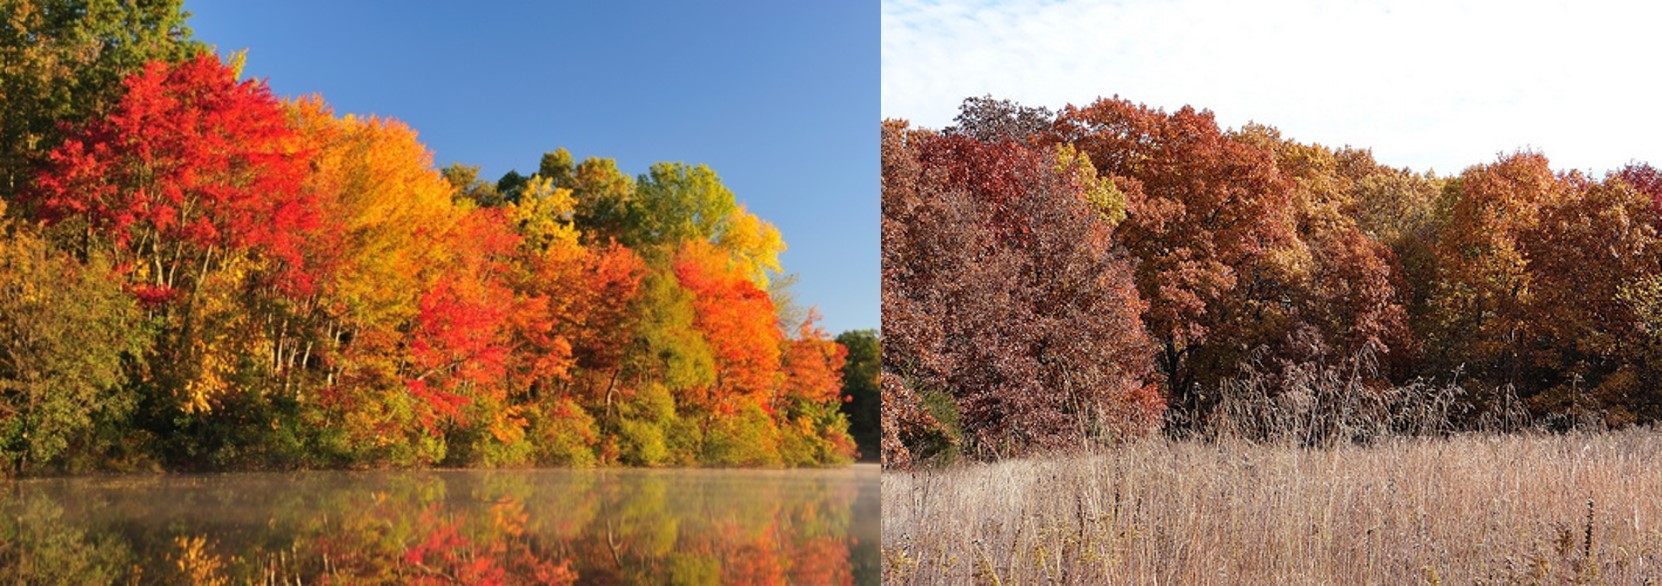 Fall color of a beech maple forest (left) and oak hickory forest (right)